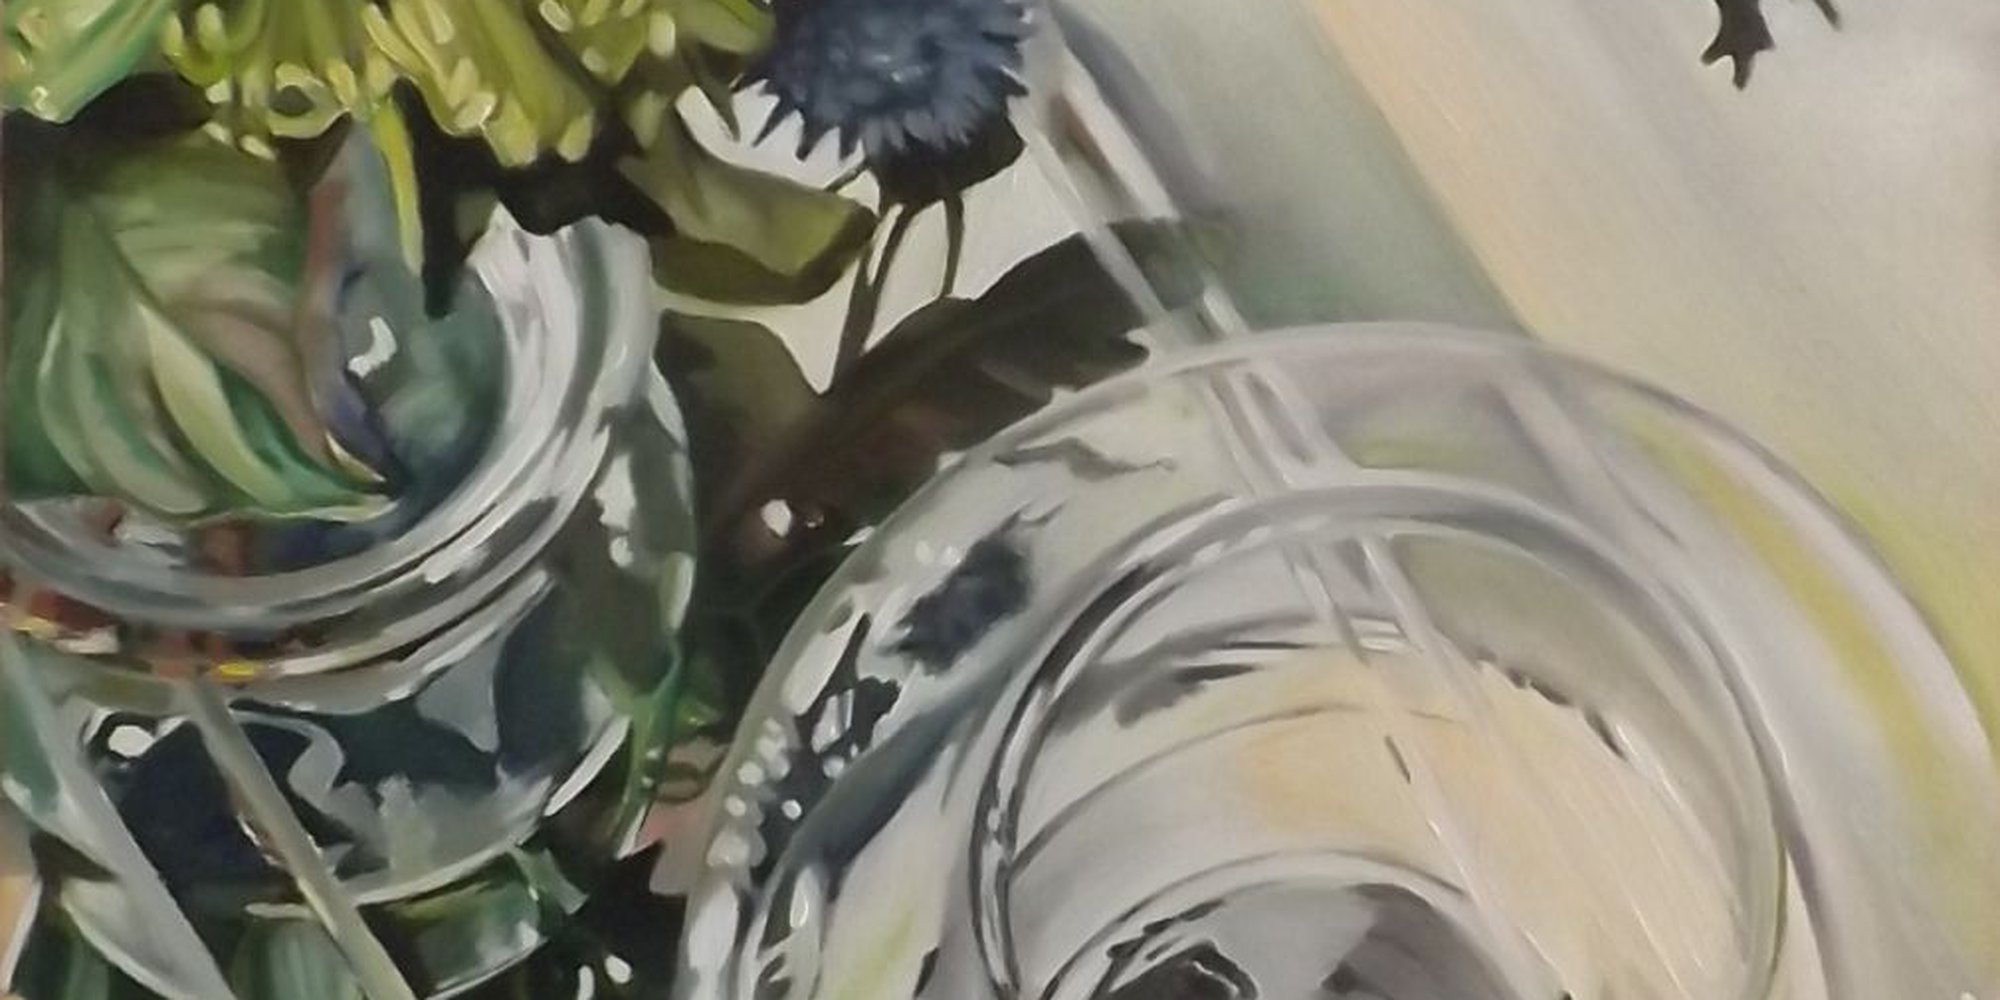 Art of the Day: "Glass Reflections with thistles 1, 2015" by Louisa J  Simpson